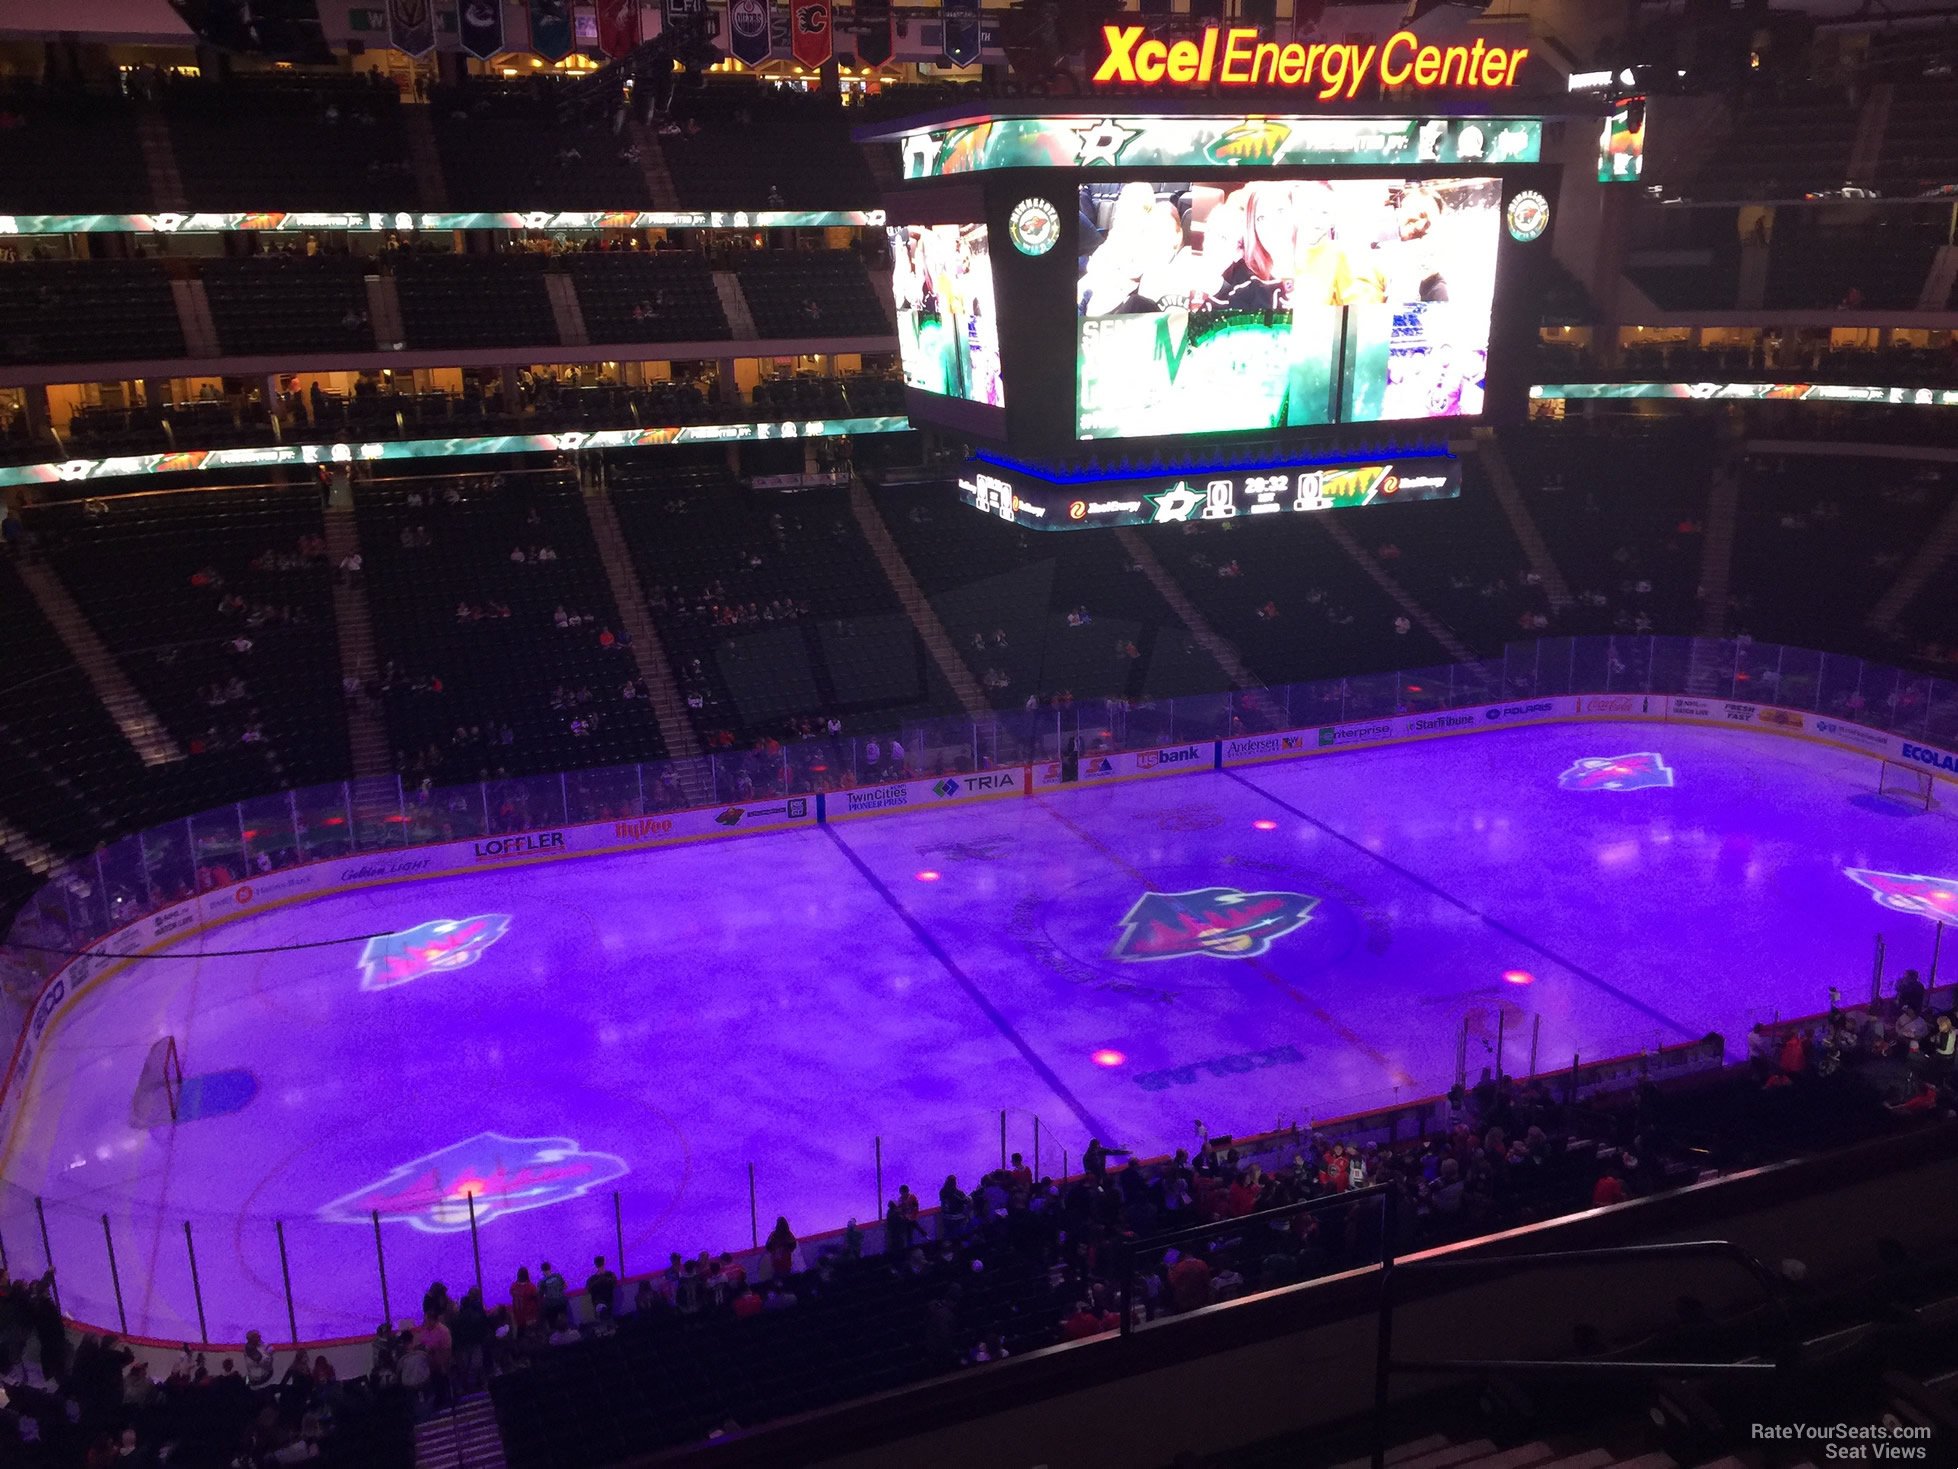 section c29, row 5 seat view  for hockey - xcel energy center